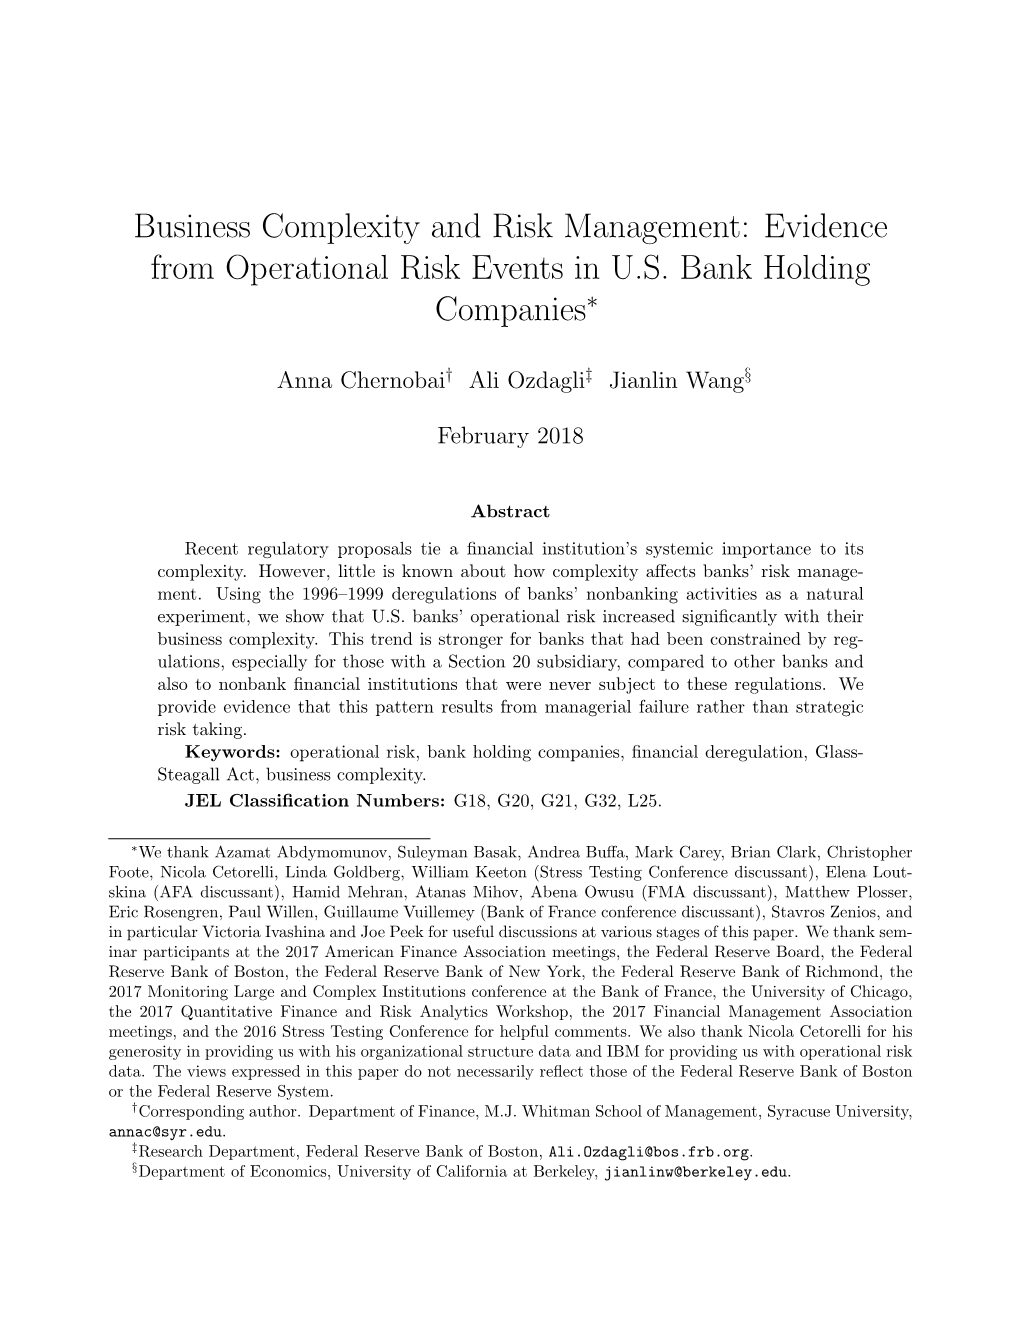 Evidence from Operational Risk Events in US Bank Holding